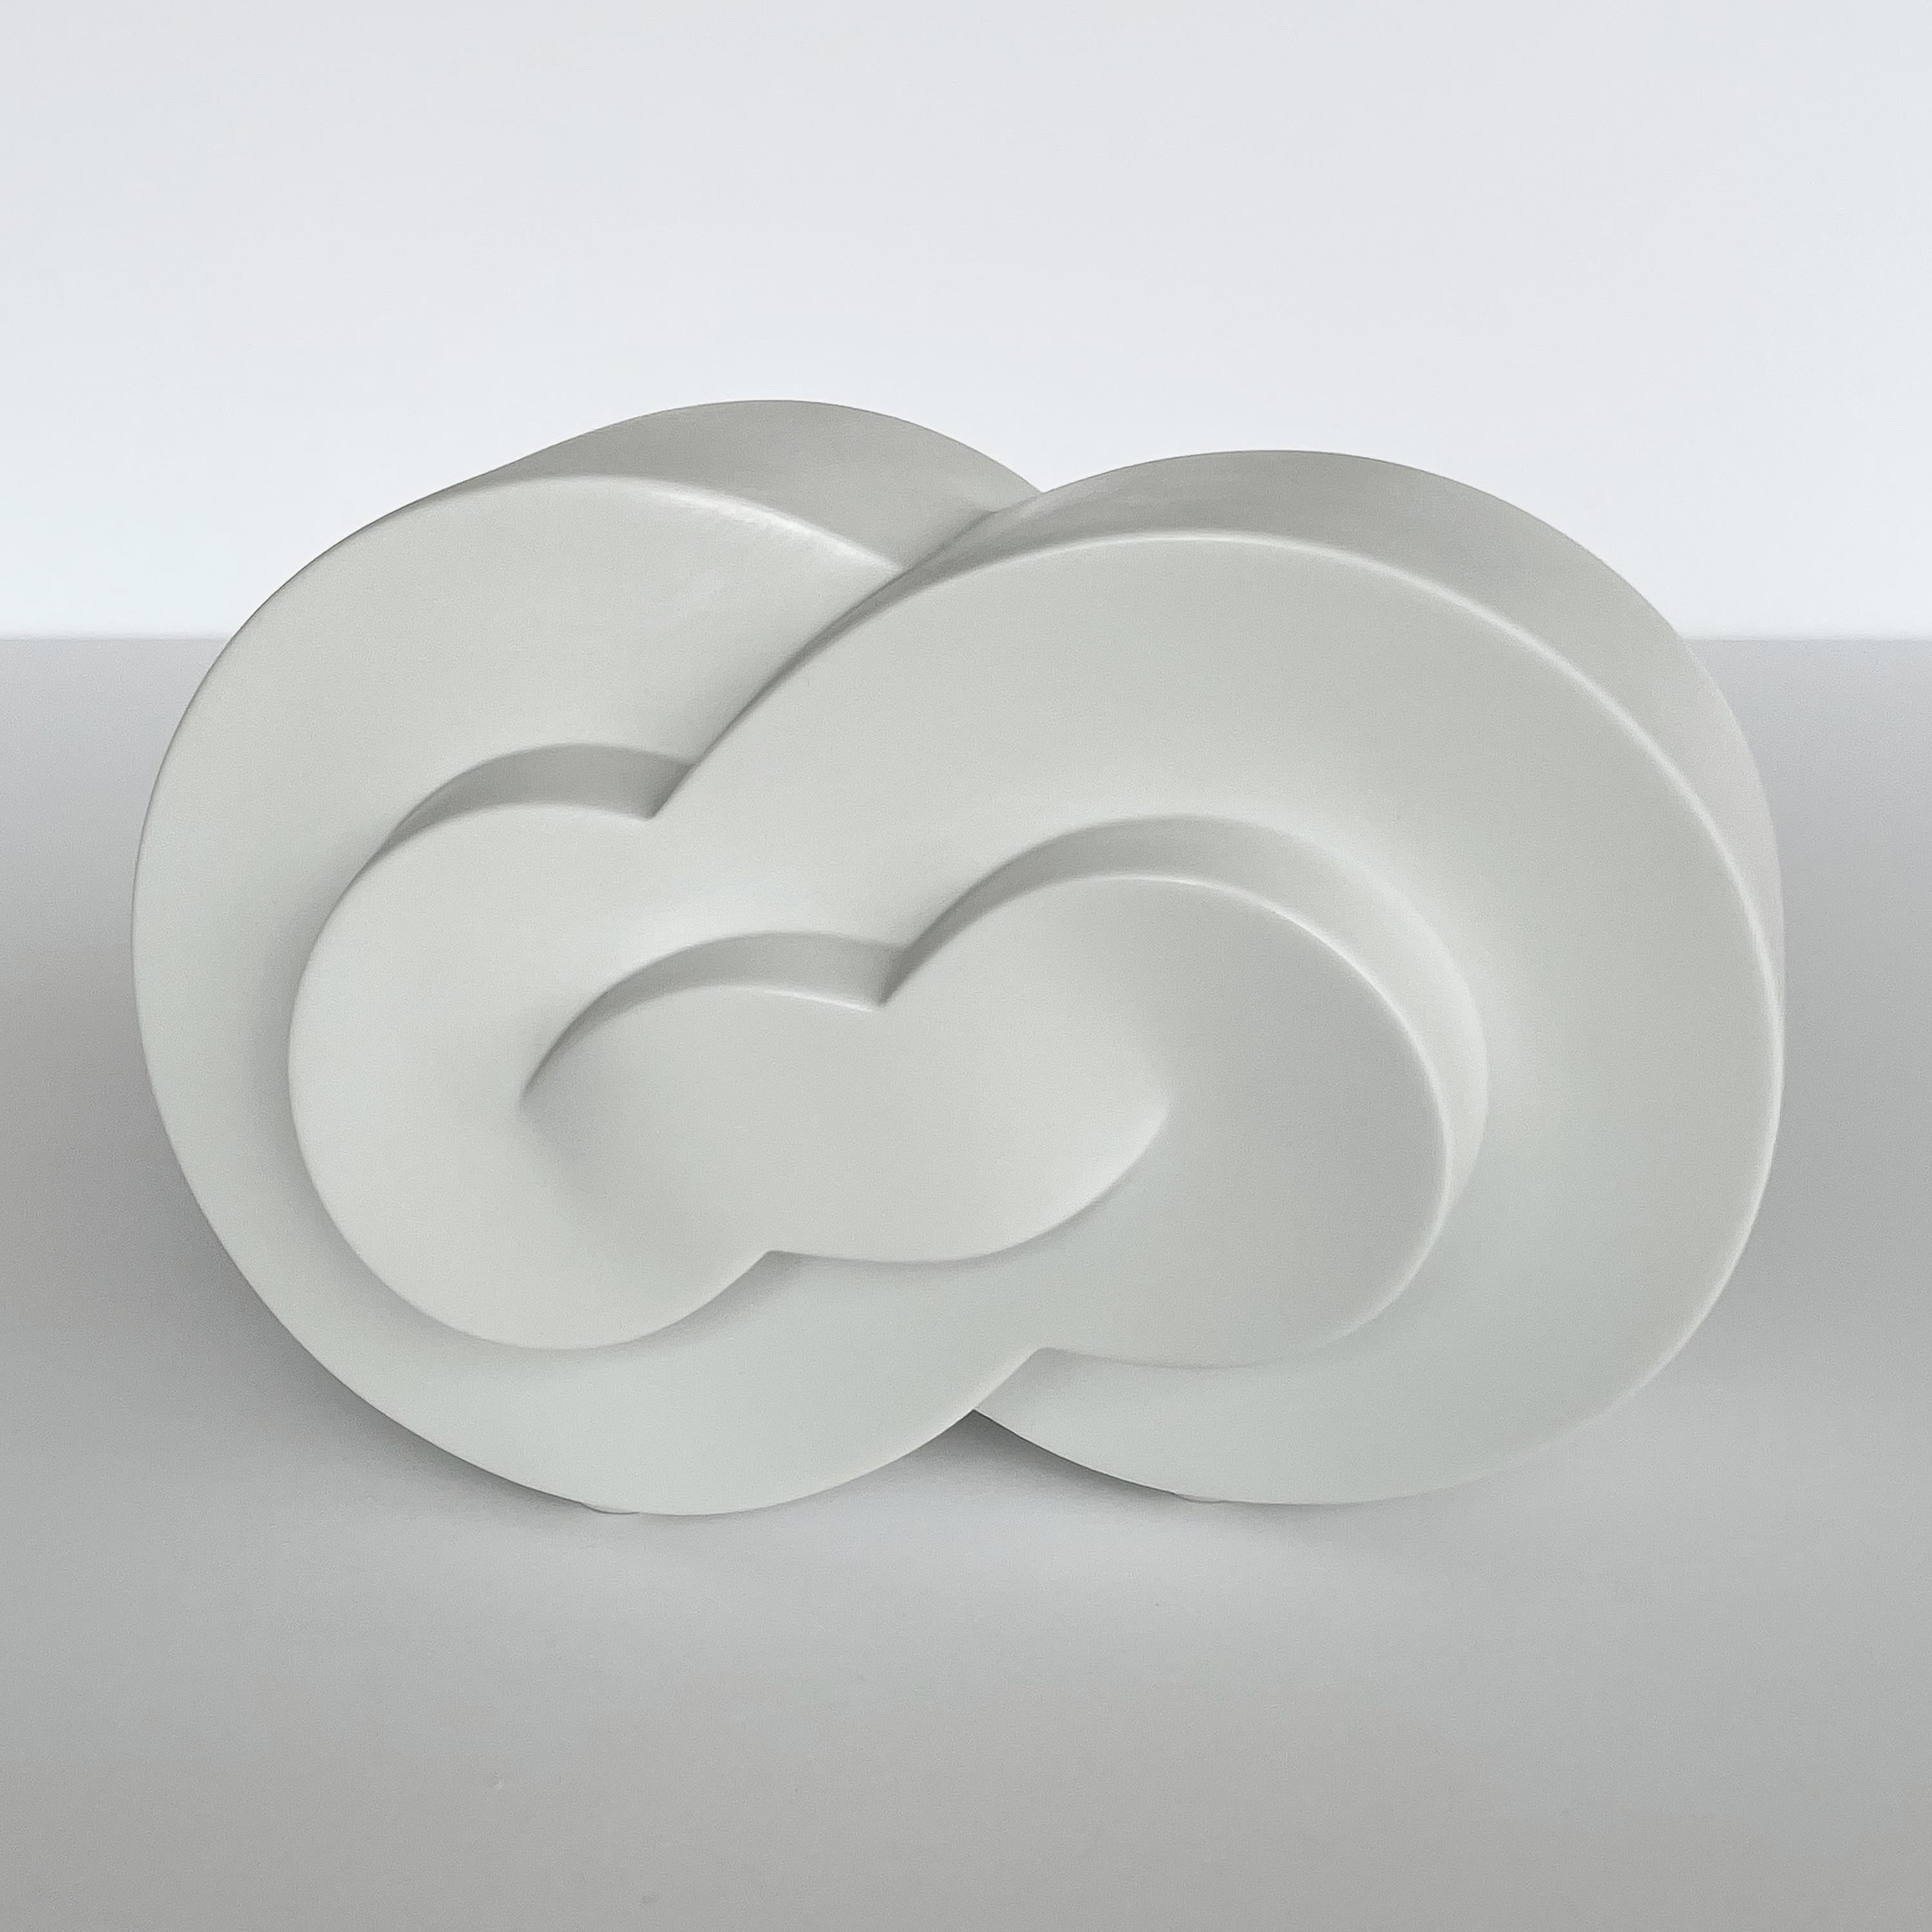 Natale Sapone Abstract Porcelain Sculpture for Rosenthal at 1stDibs